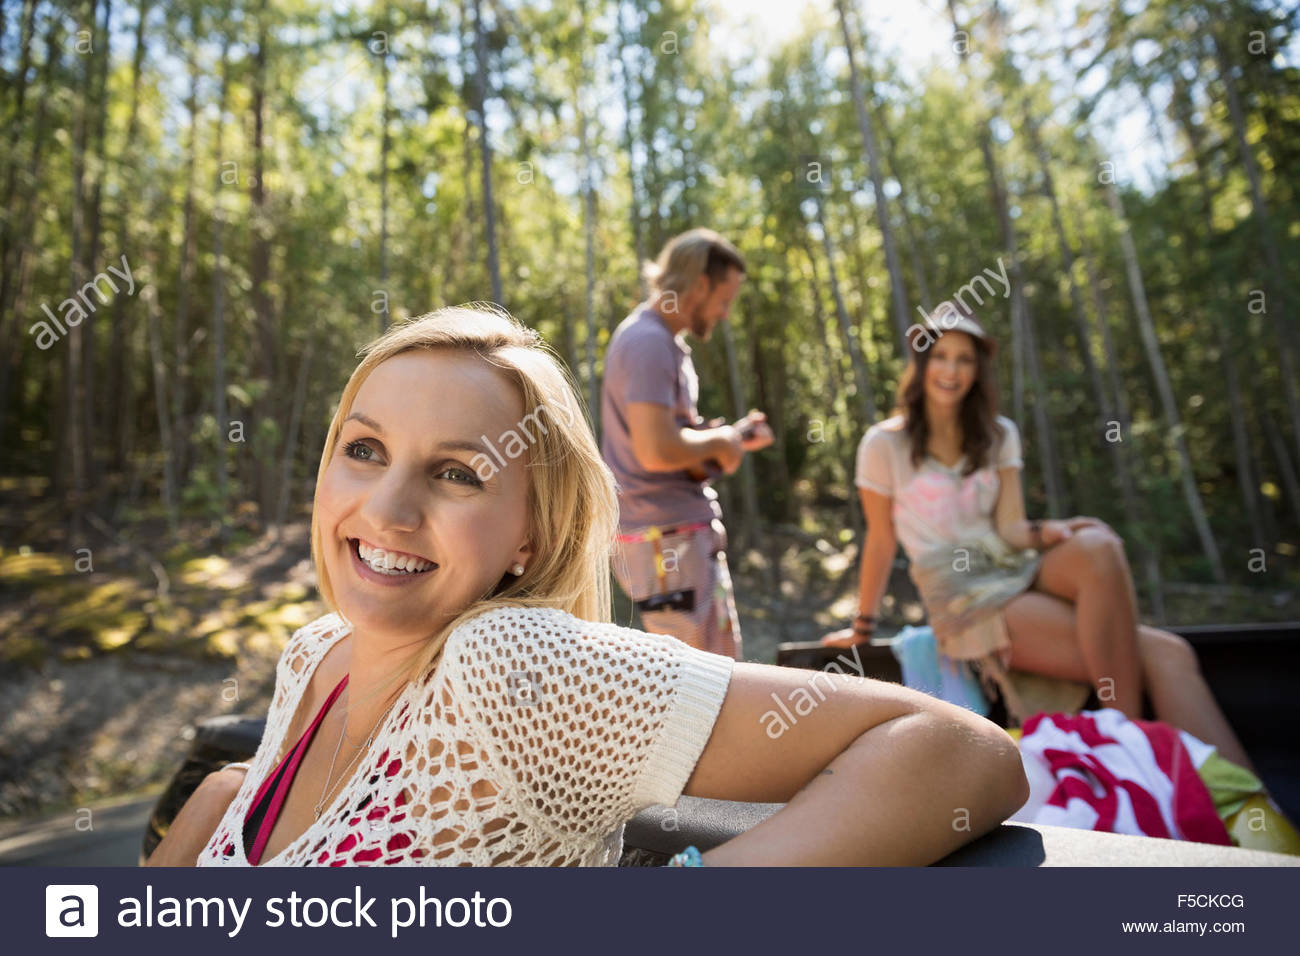 Smiling young friends hanging out Stock Photo